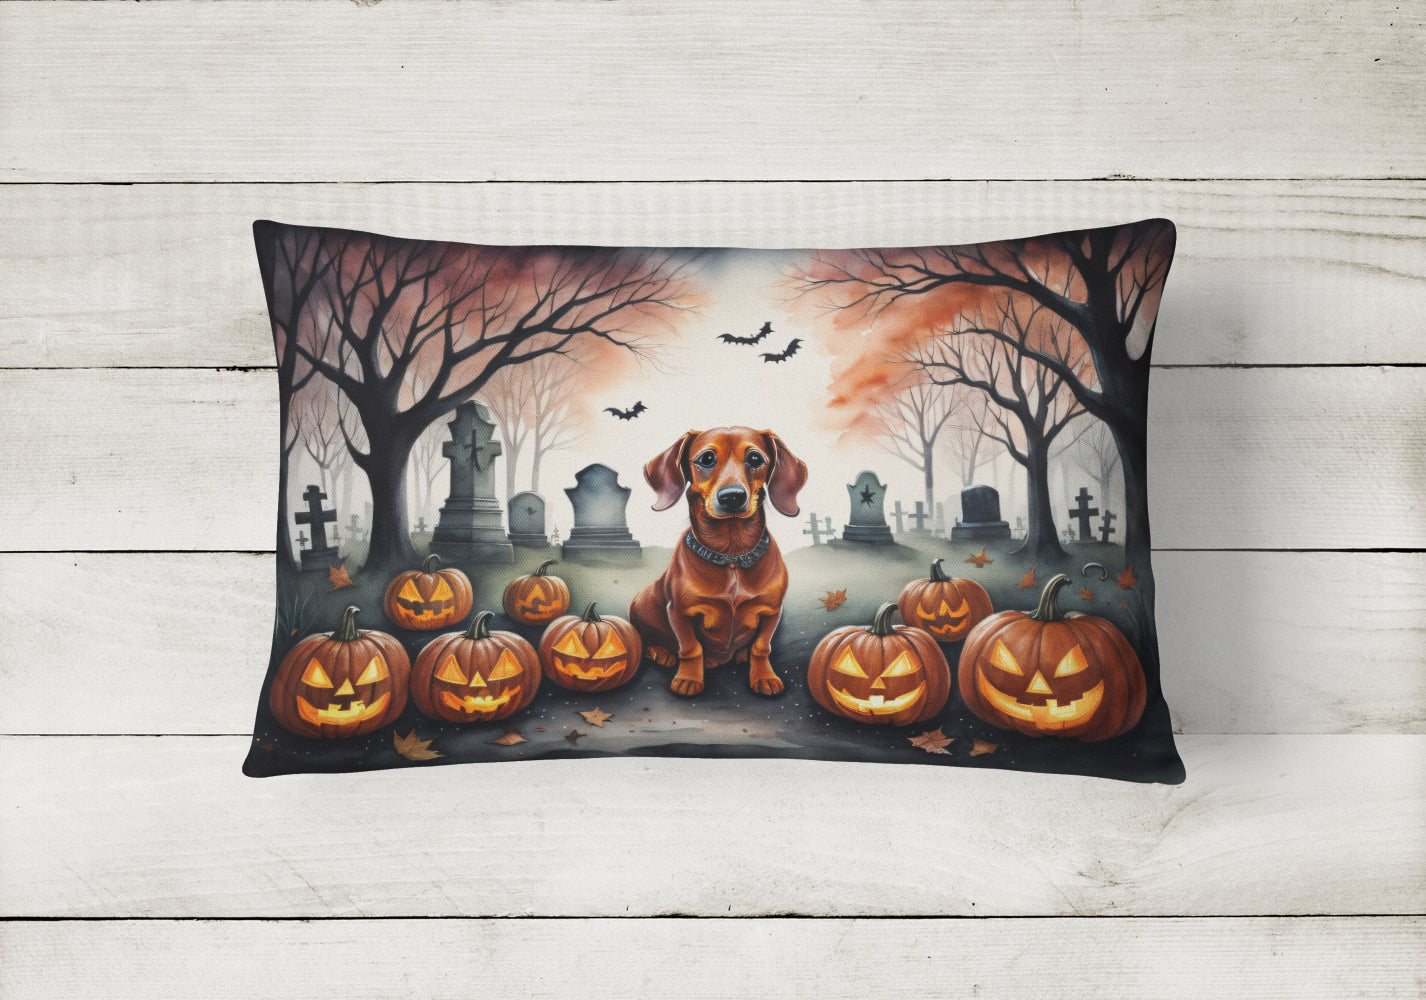 Buy this Dachshund Spooky Halloween Fabric Decorative Pillow